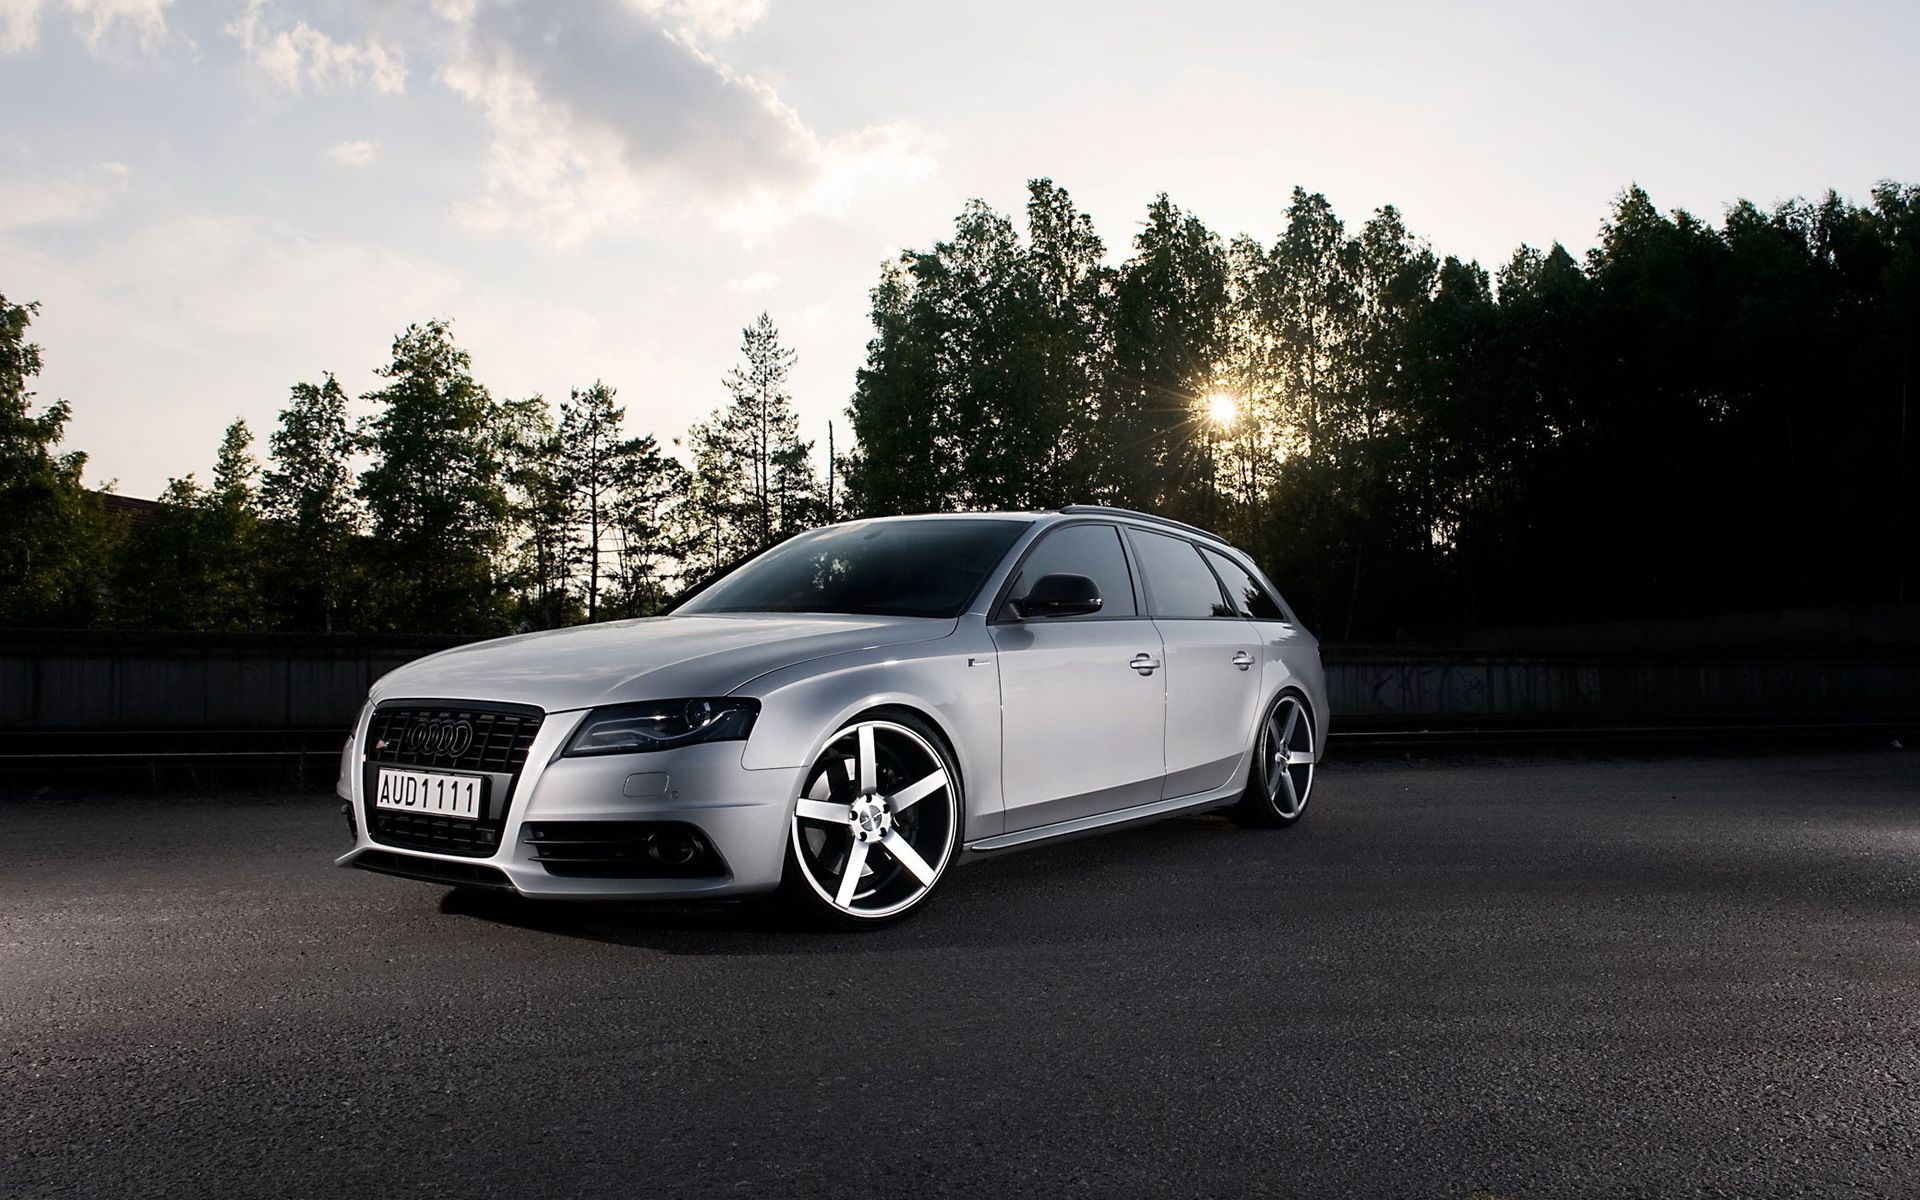 Audi S4 - photo wallpapers and pictures Audi S4